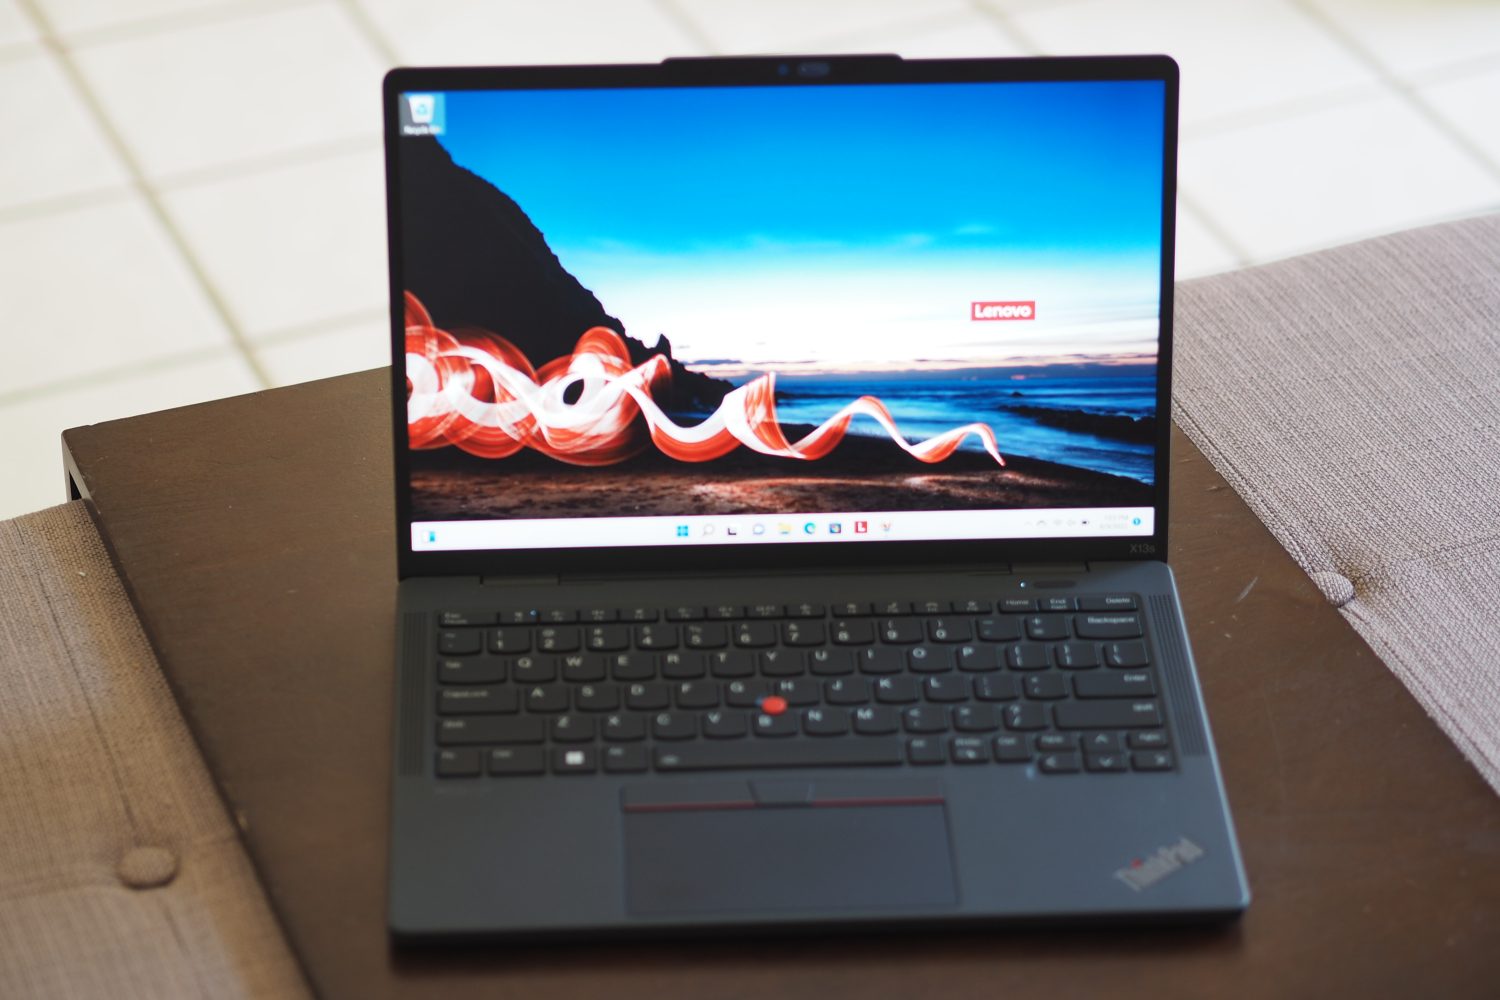 The ThinkPad X13s is Lenovo's first Snapdragon-powered ThinkPad, promises  up to 28 hours of battery life